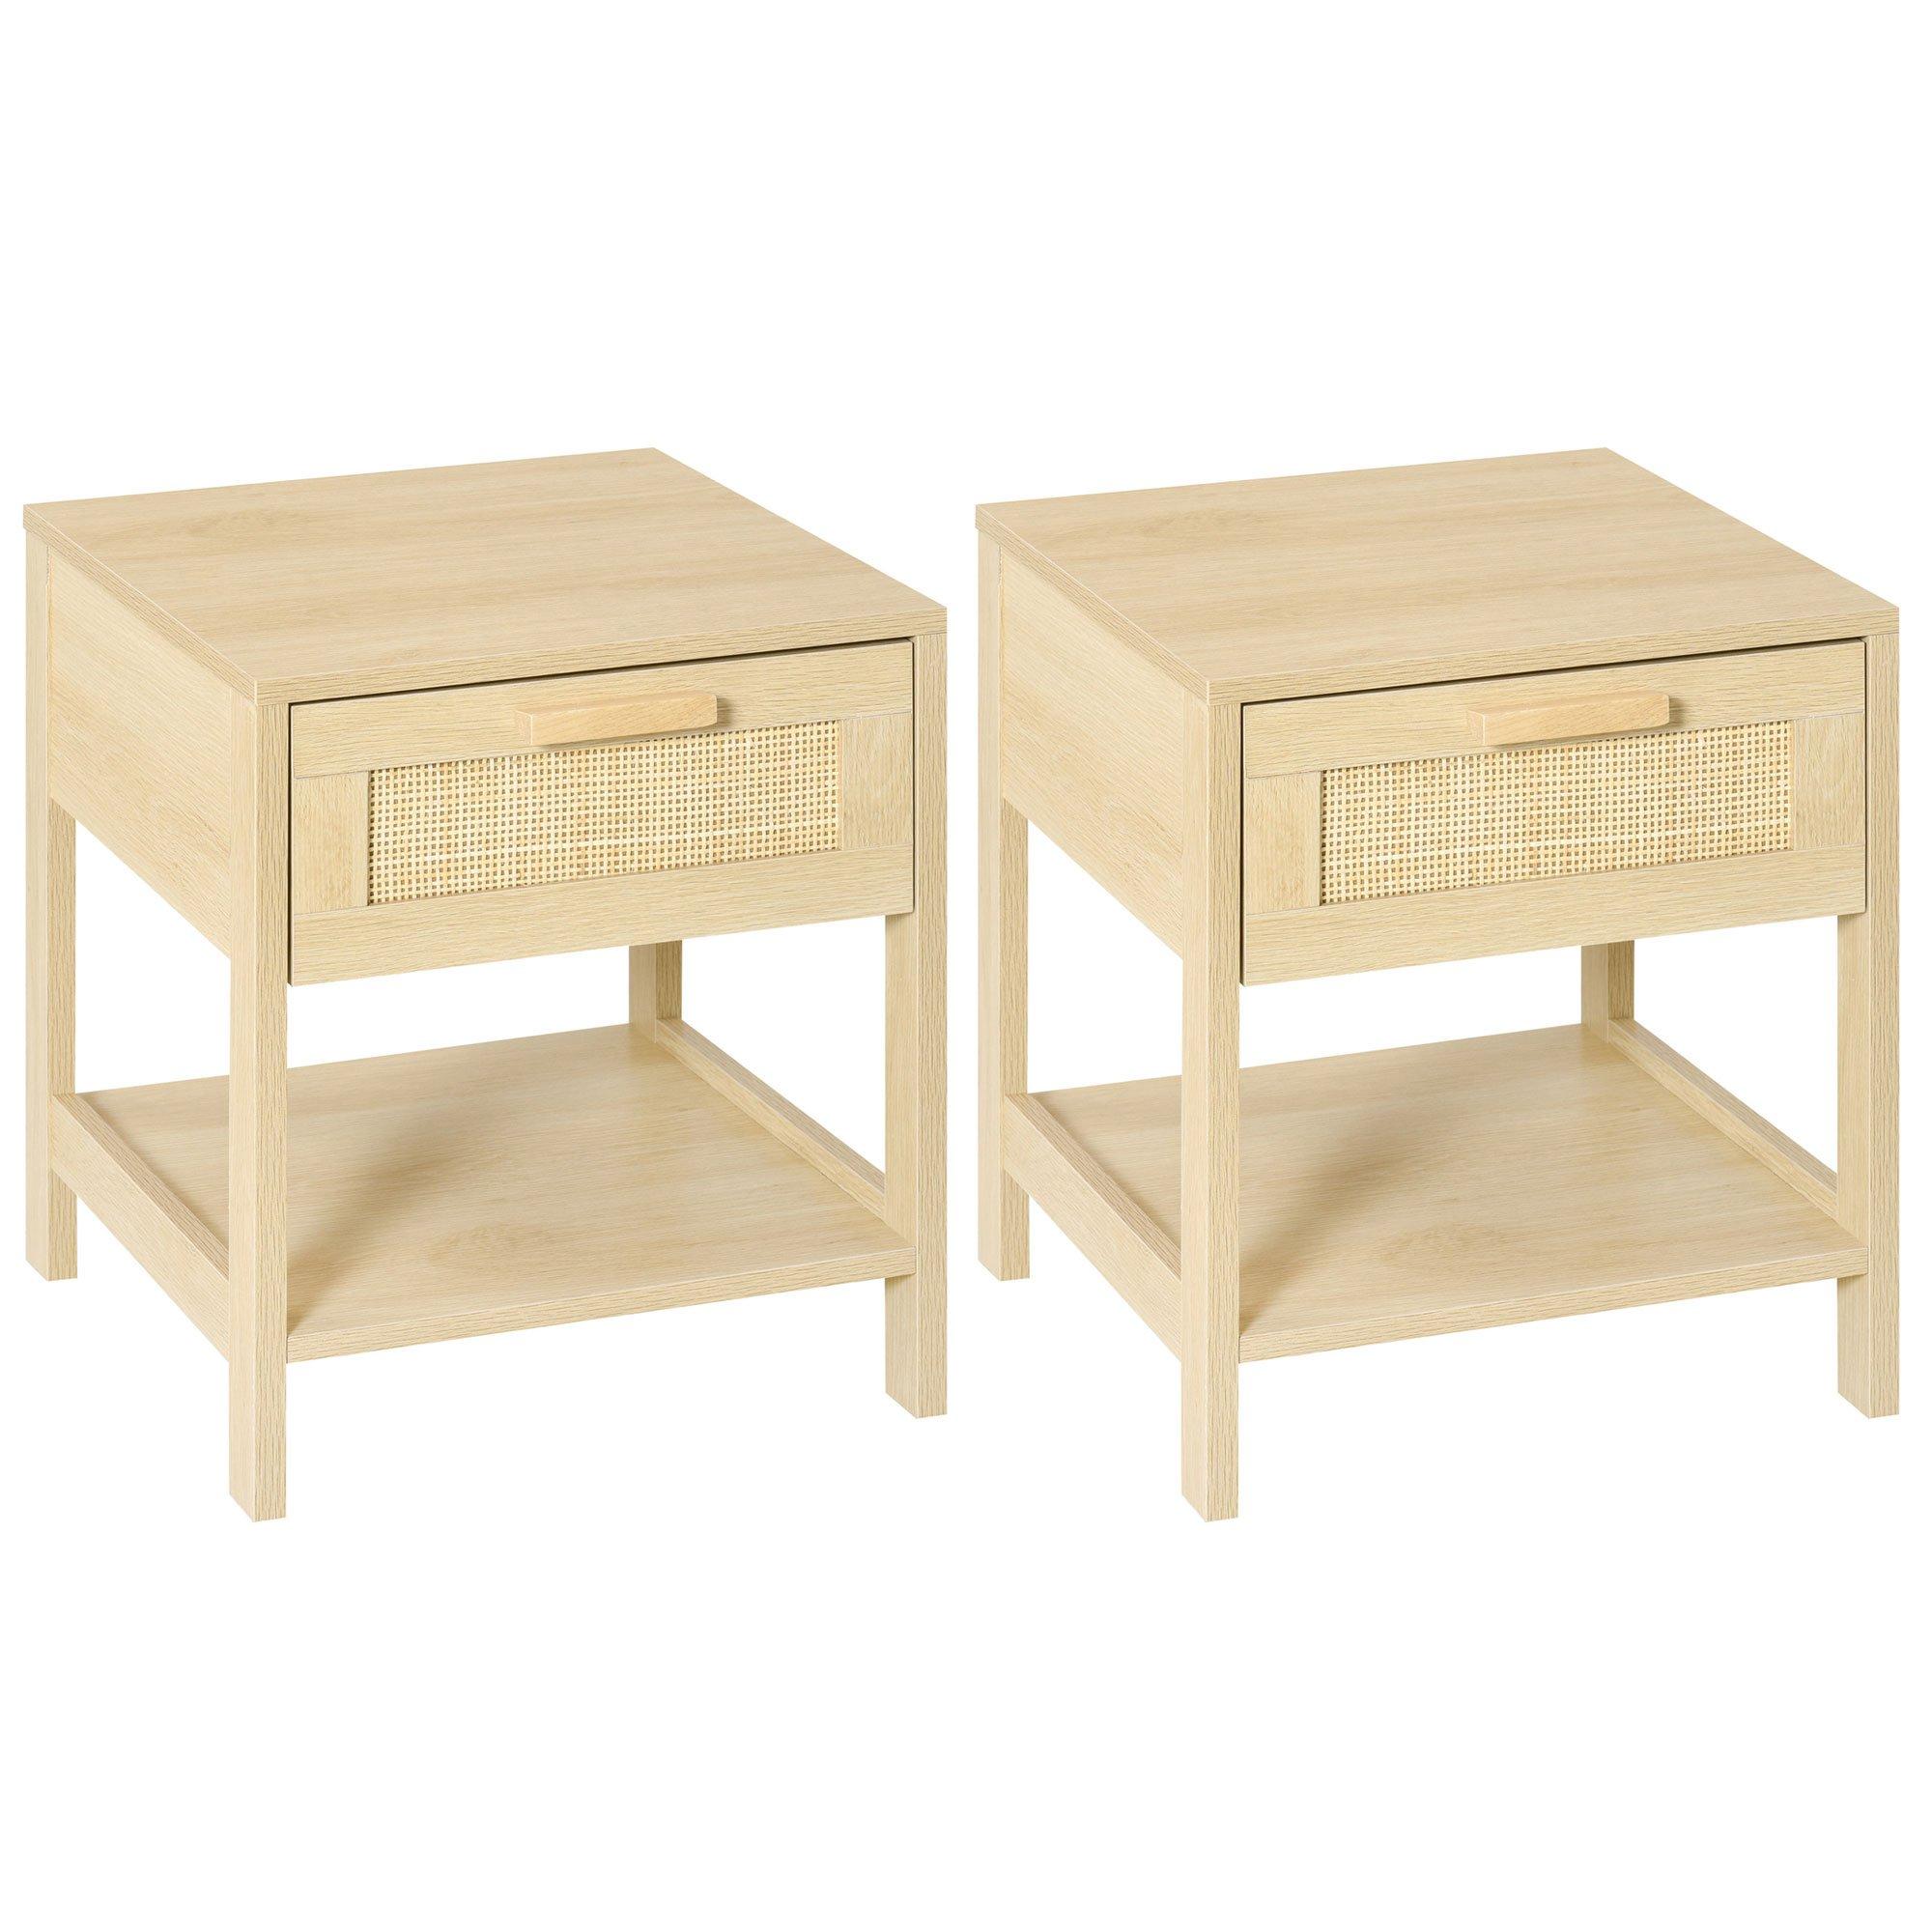 Bedside Table Nightstand with Rattan Drawer Storage Shelf